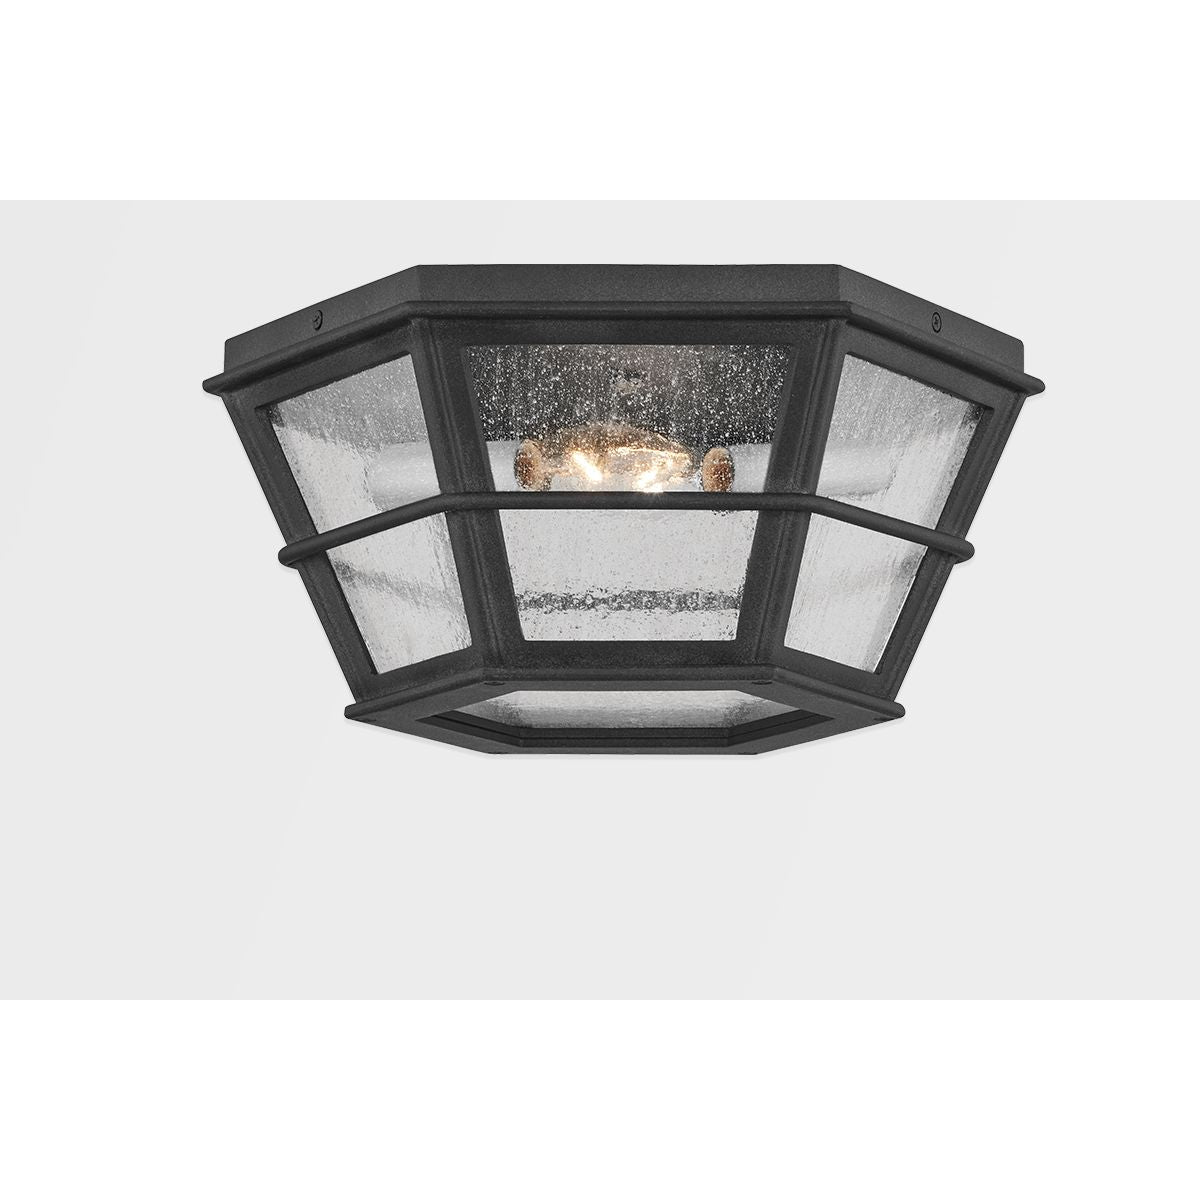 LAKE COUNTY 14 in. 2 lights Outdoor Flush Mount iron finish - Bees Lighting